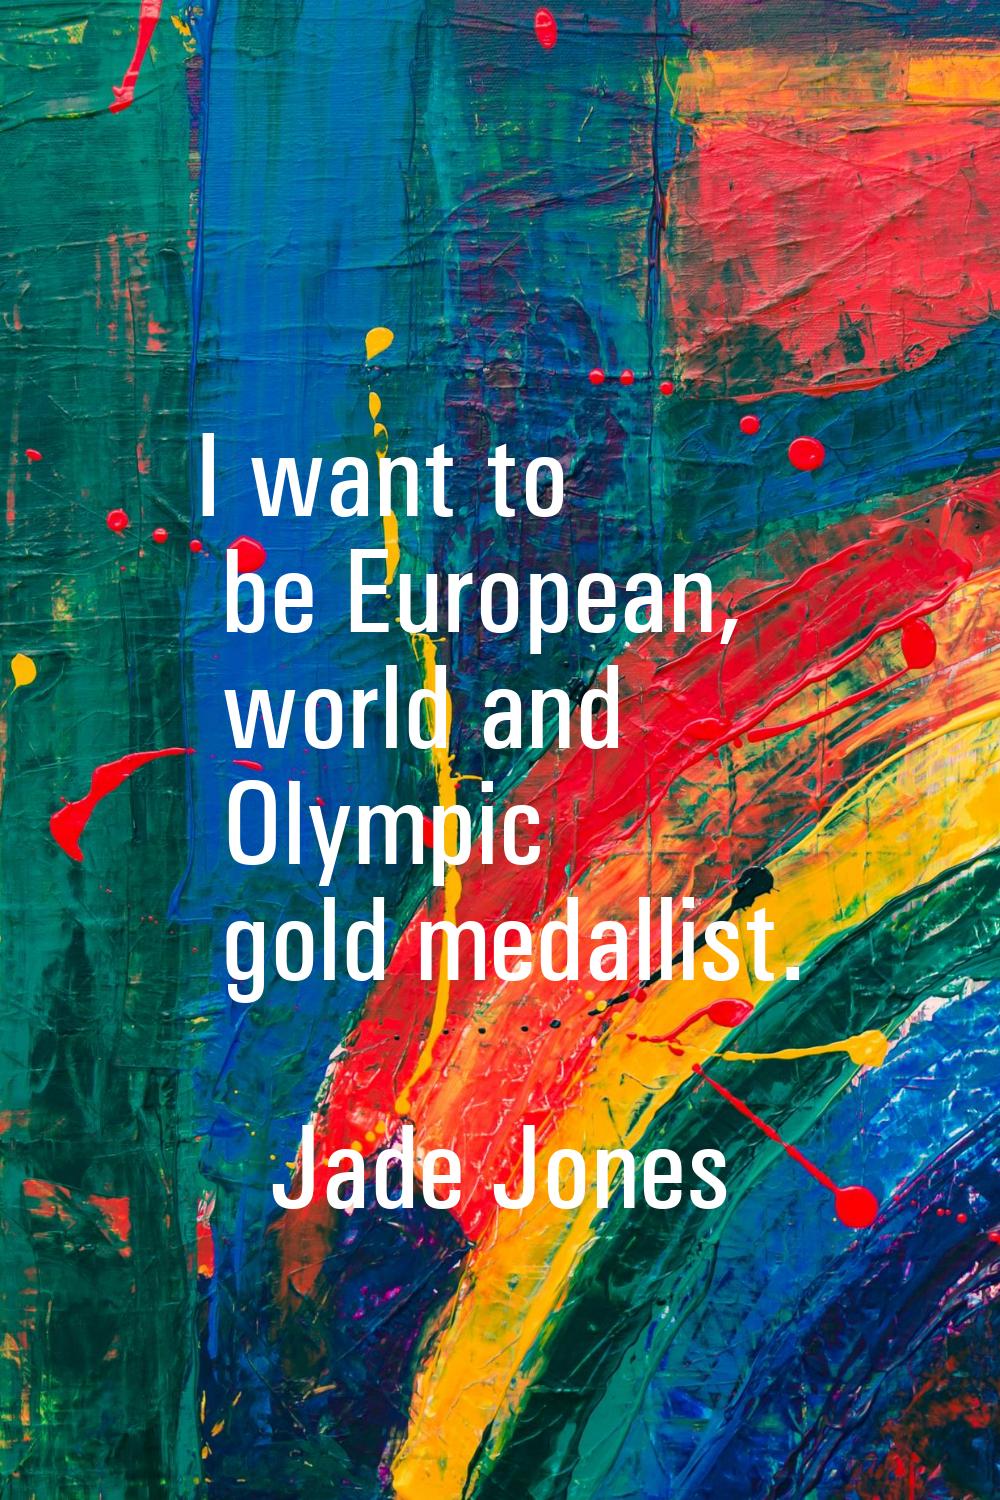 I want to be European, world and Olympic gold medallist.